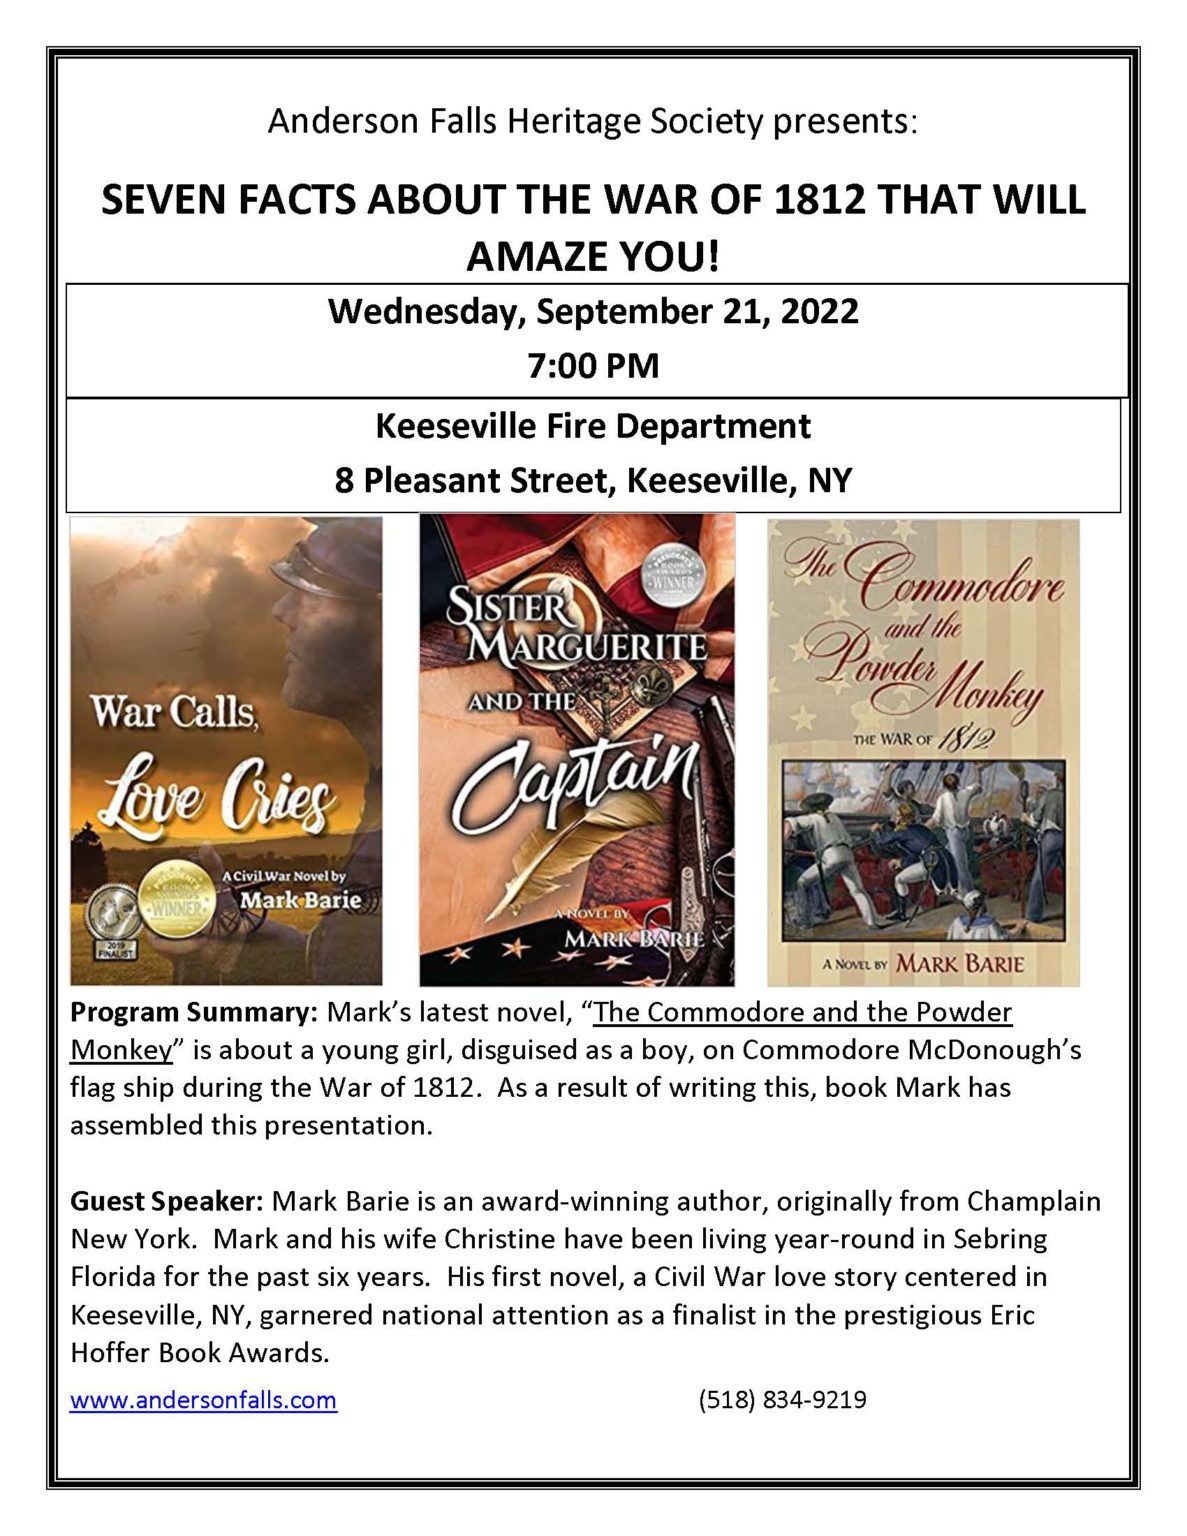 “Seven Facts About the War of 1812 That Will Amaze You!” Anderson